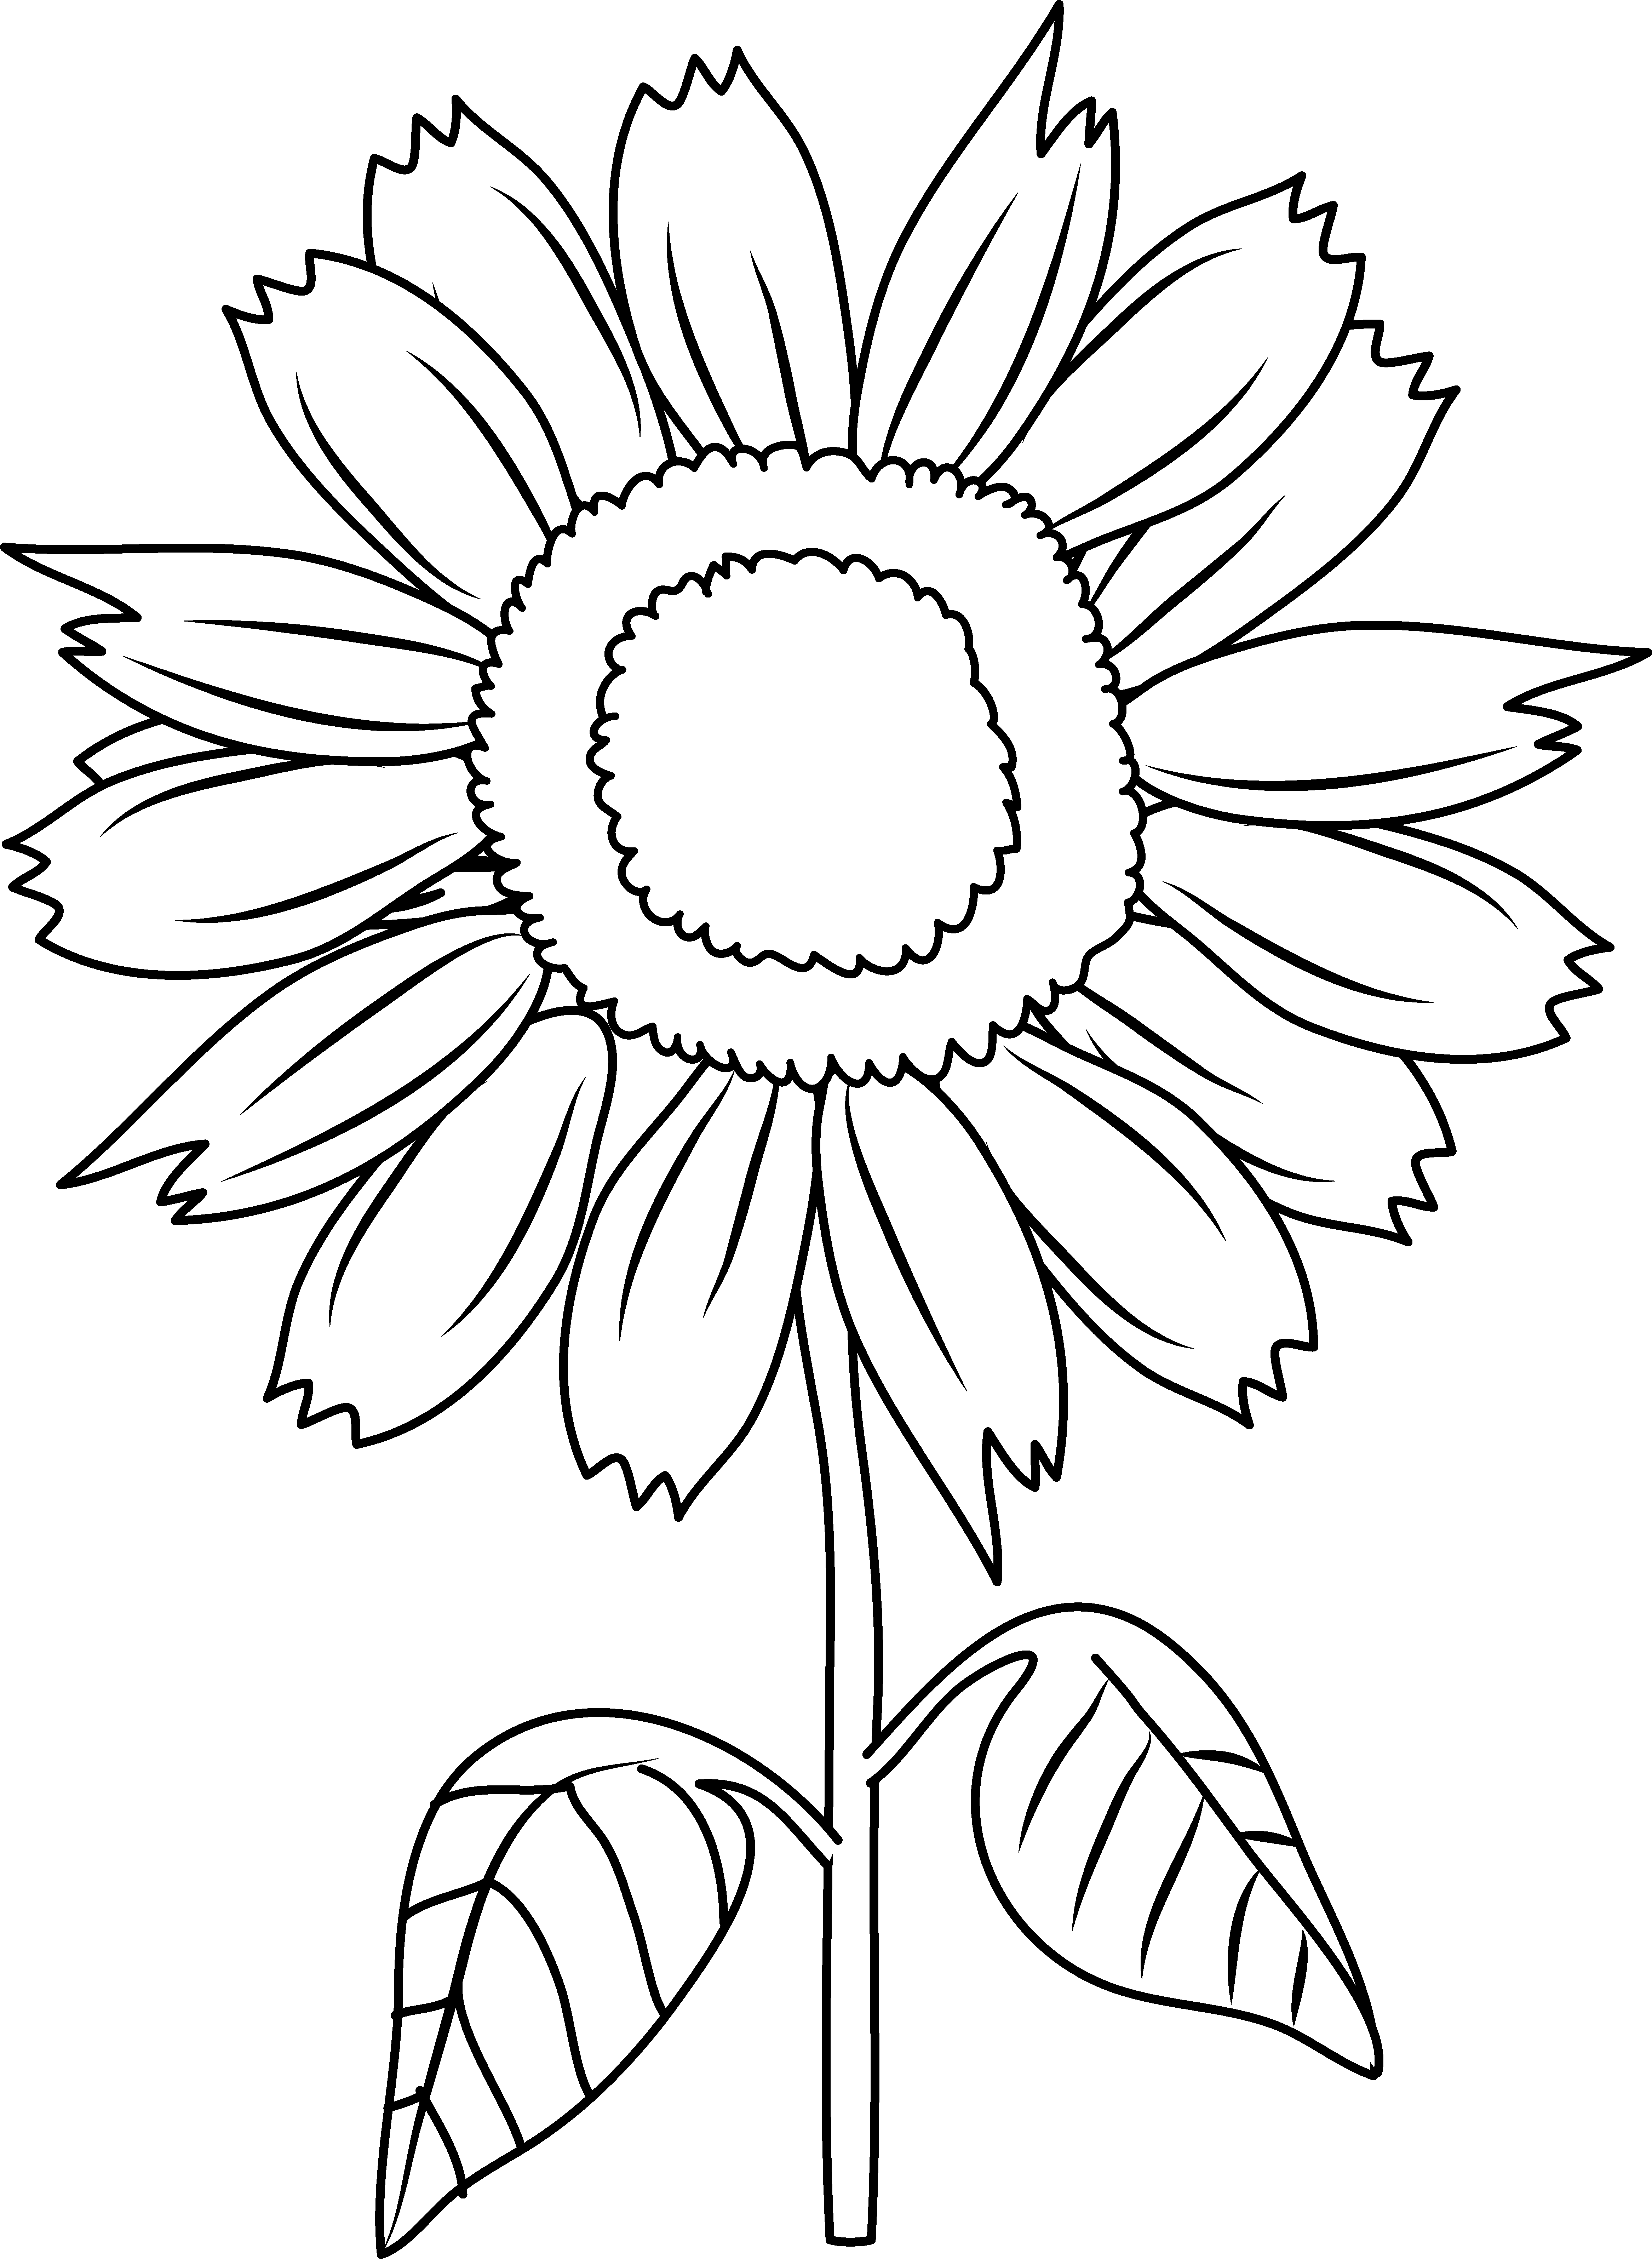 Pretty Sunflower Coloring Page - Sunflower Png Transparent Black - HD Wallpaper 